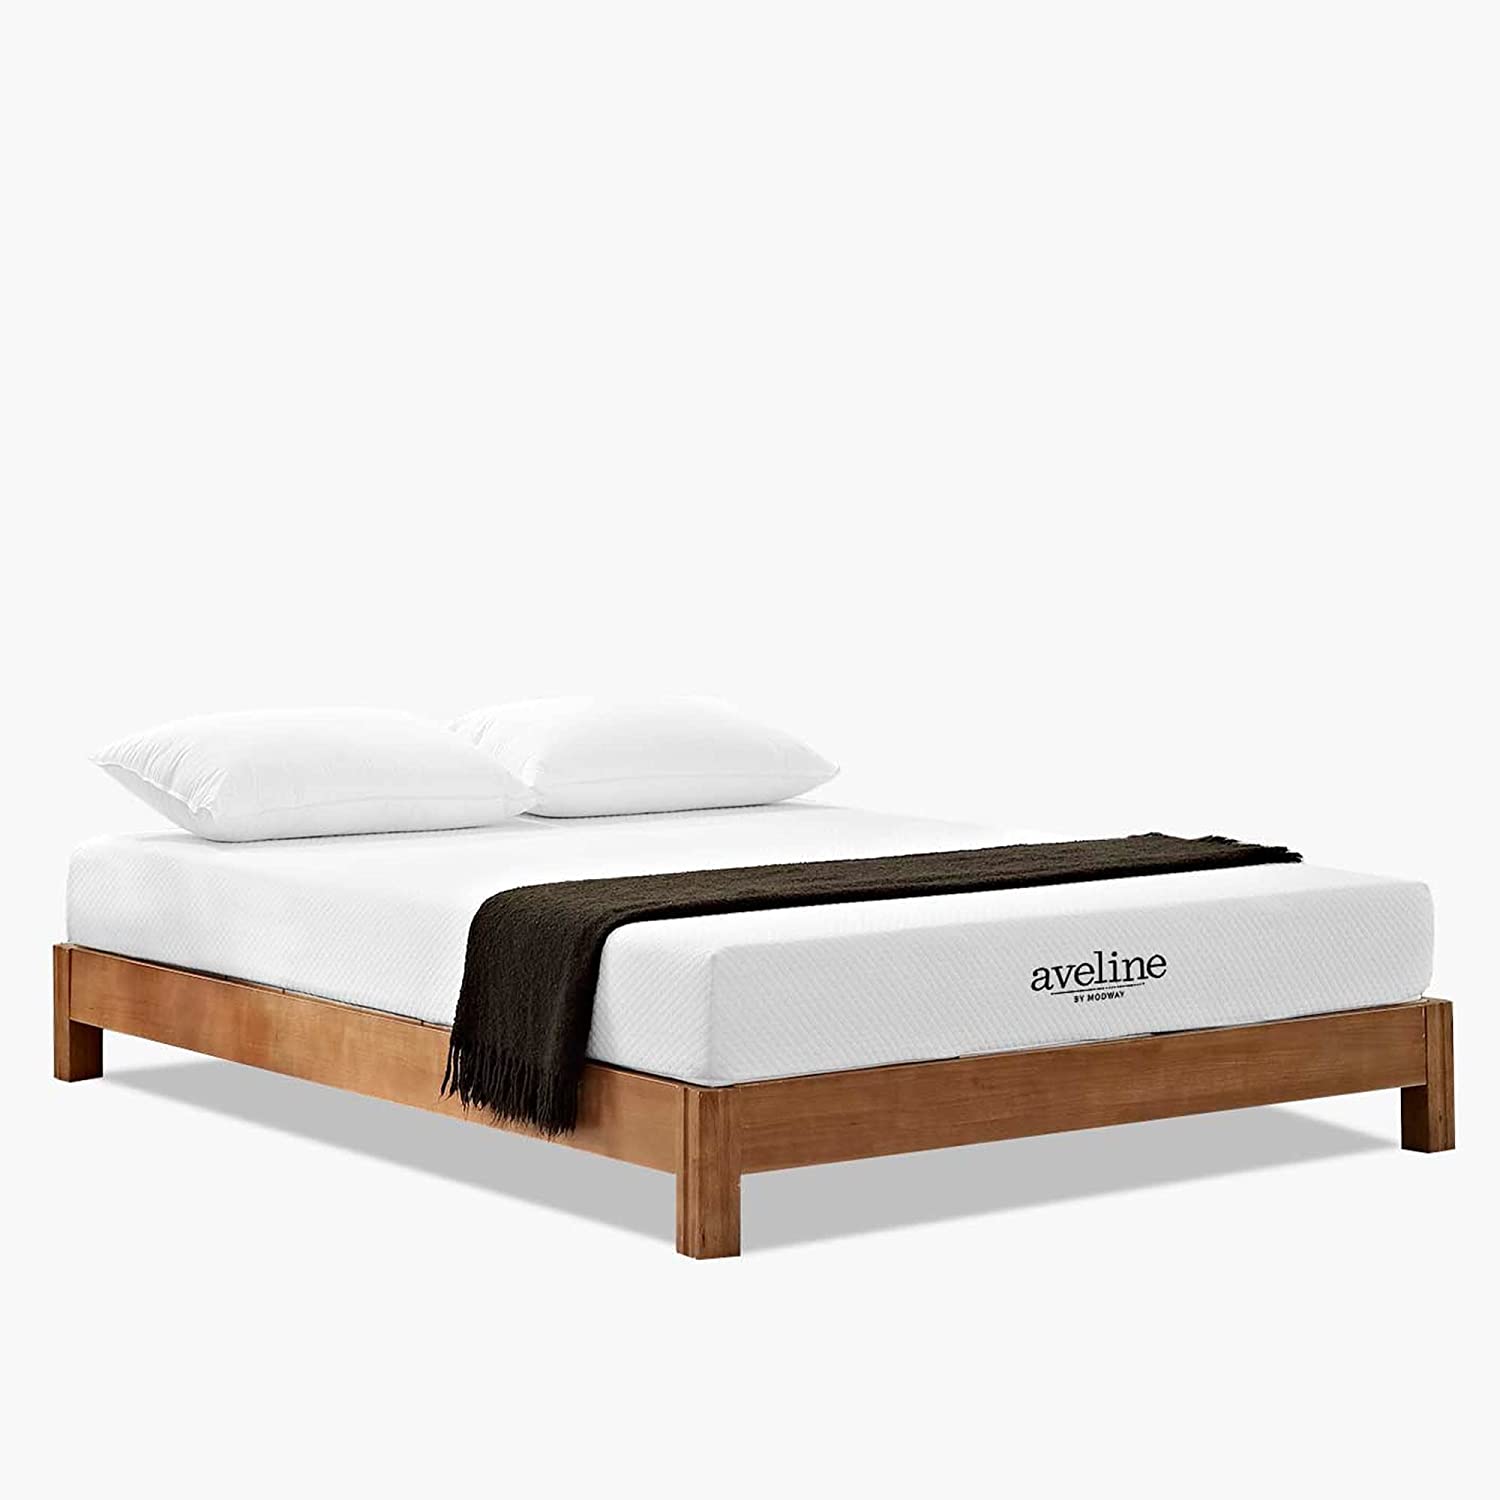 Modway Aveline Bed Mattress Conventional, Full, White